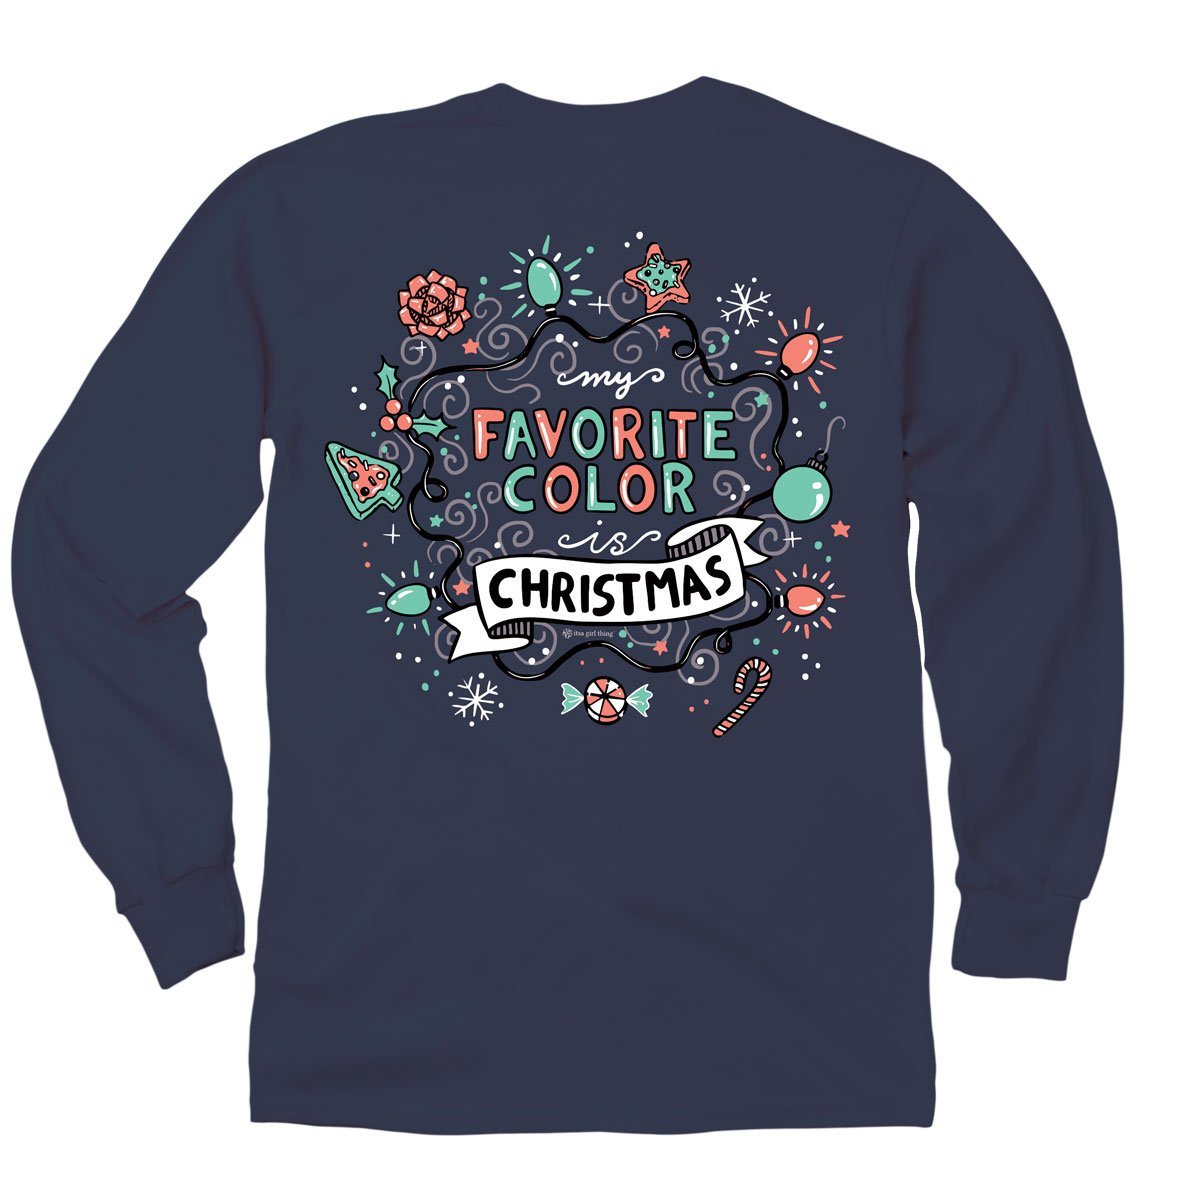 Favorite Christmas Color Long Sleeve Tee, Youth